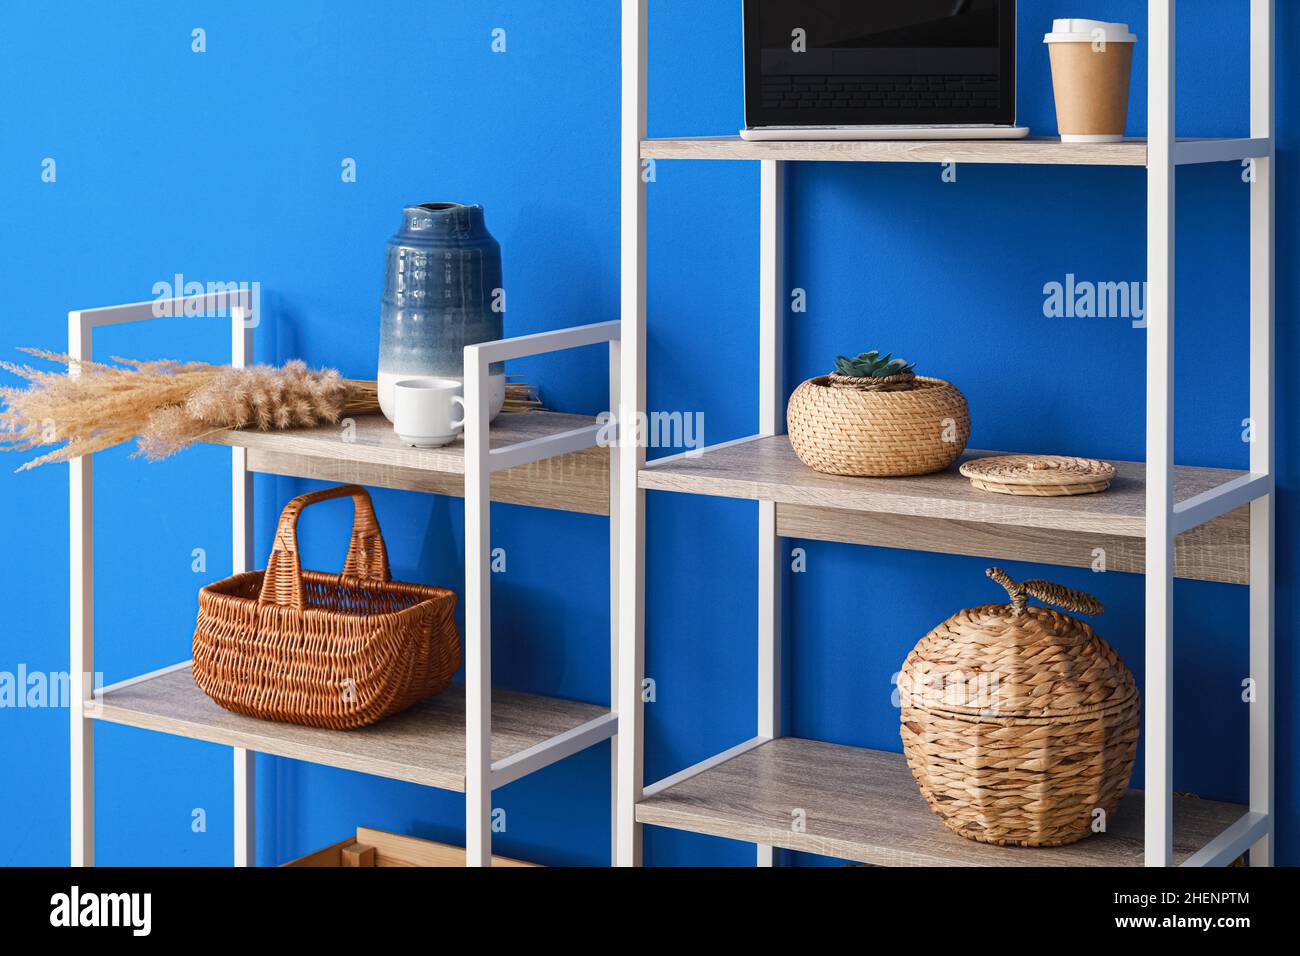 Shelving unit with decor, laptop computer and cups of coffee near blue wall Stock Photo